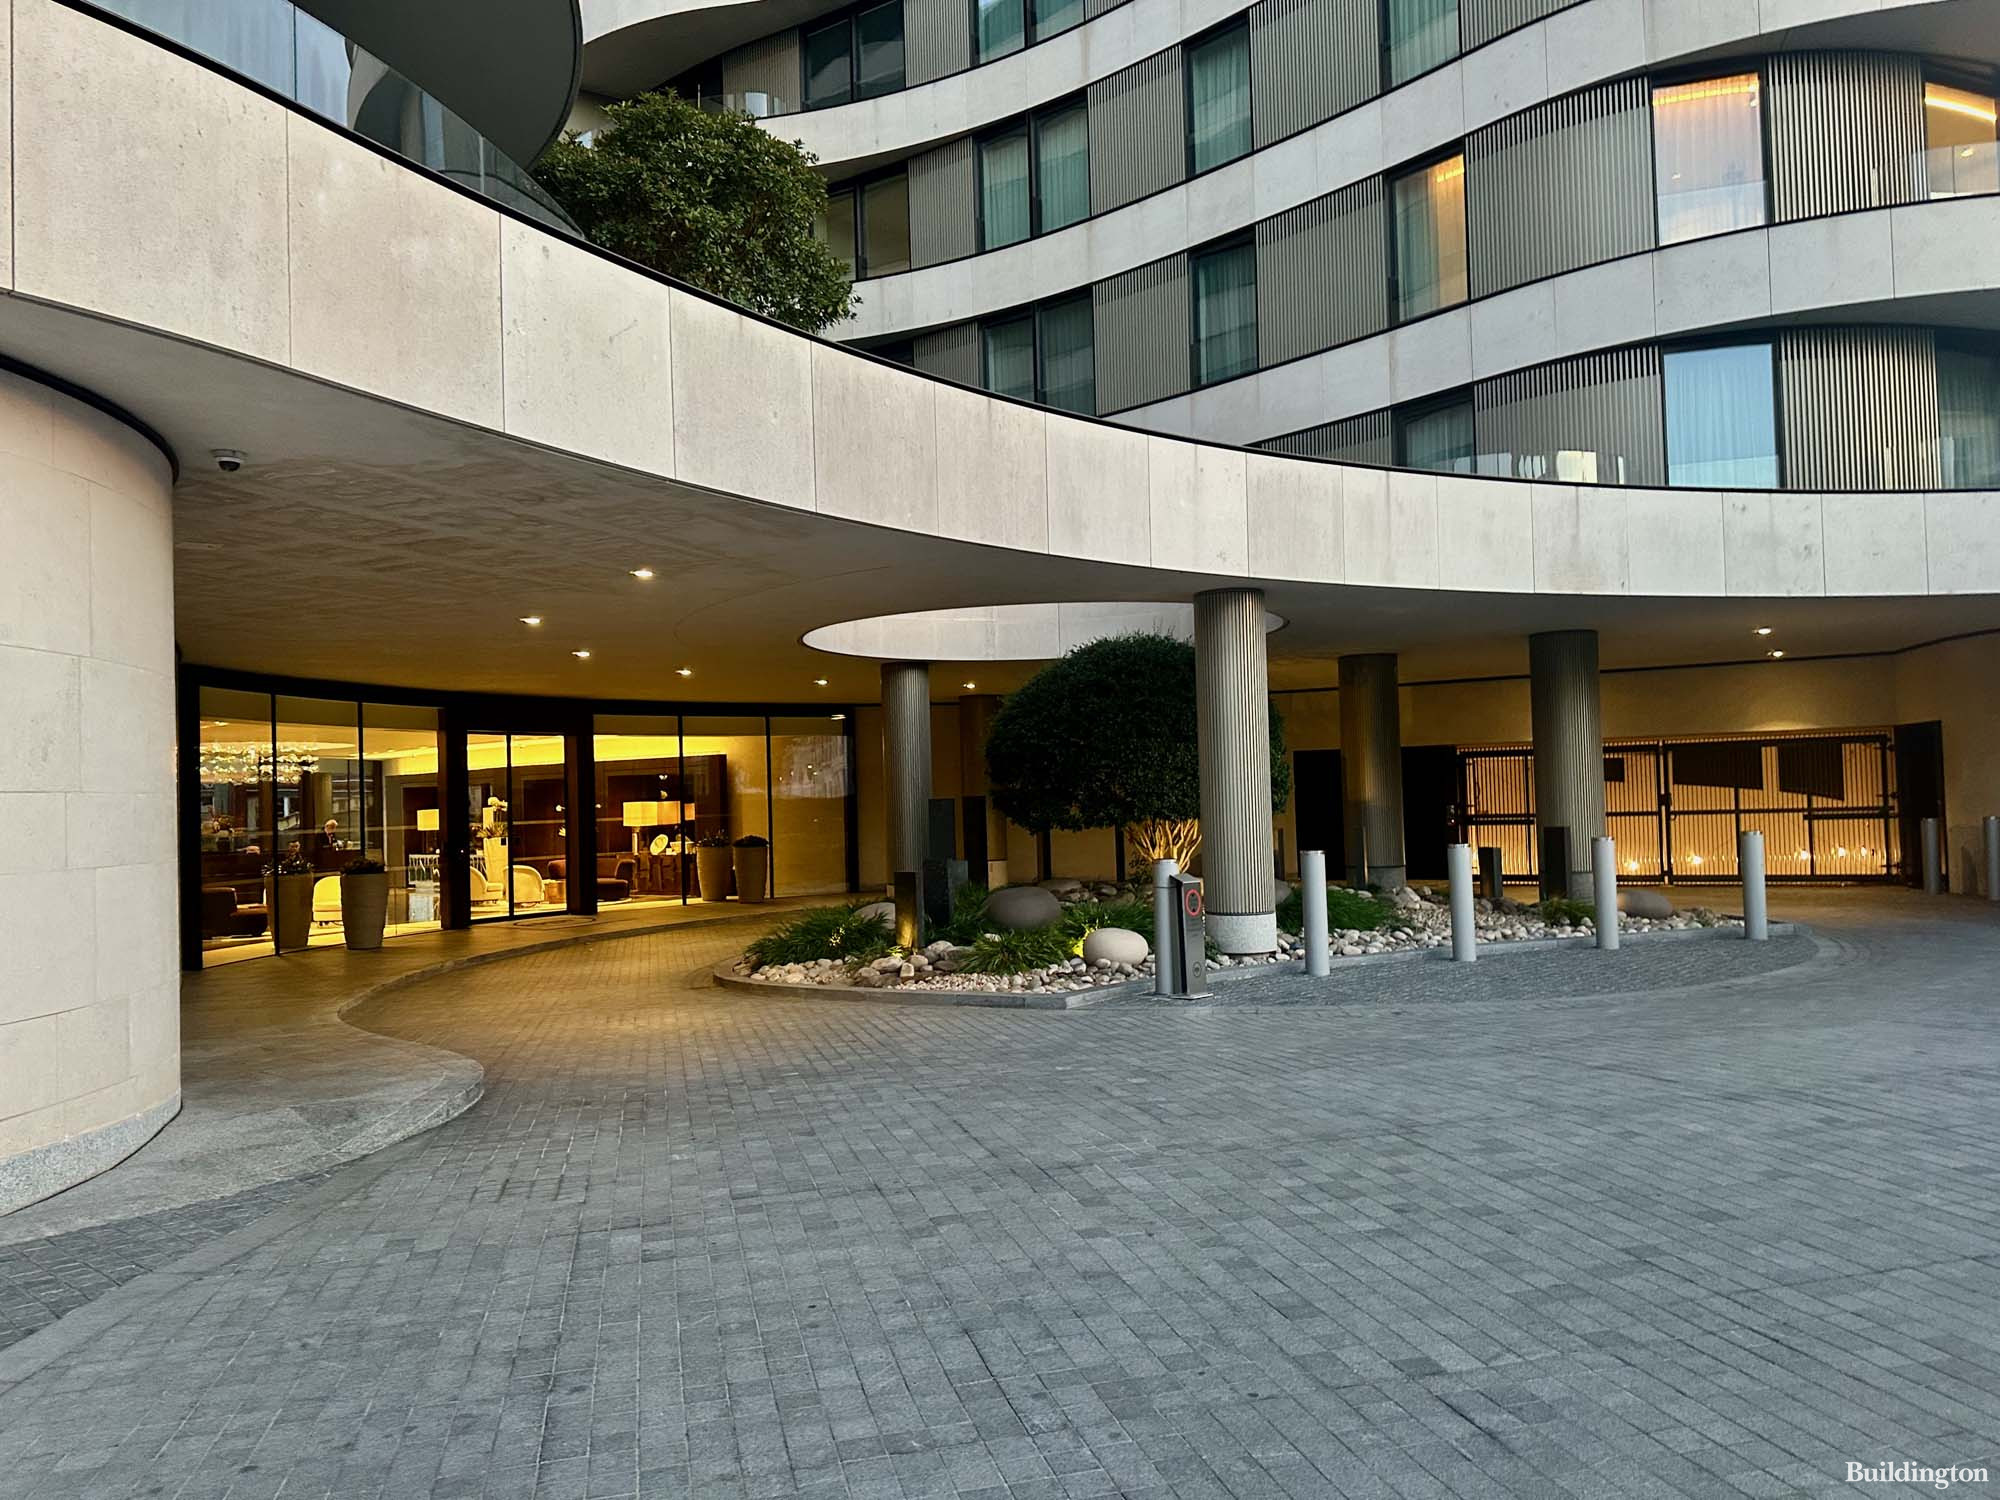 The Riverwalk driveway off Millbank leading up to the main entrance of the building.